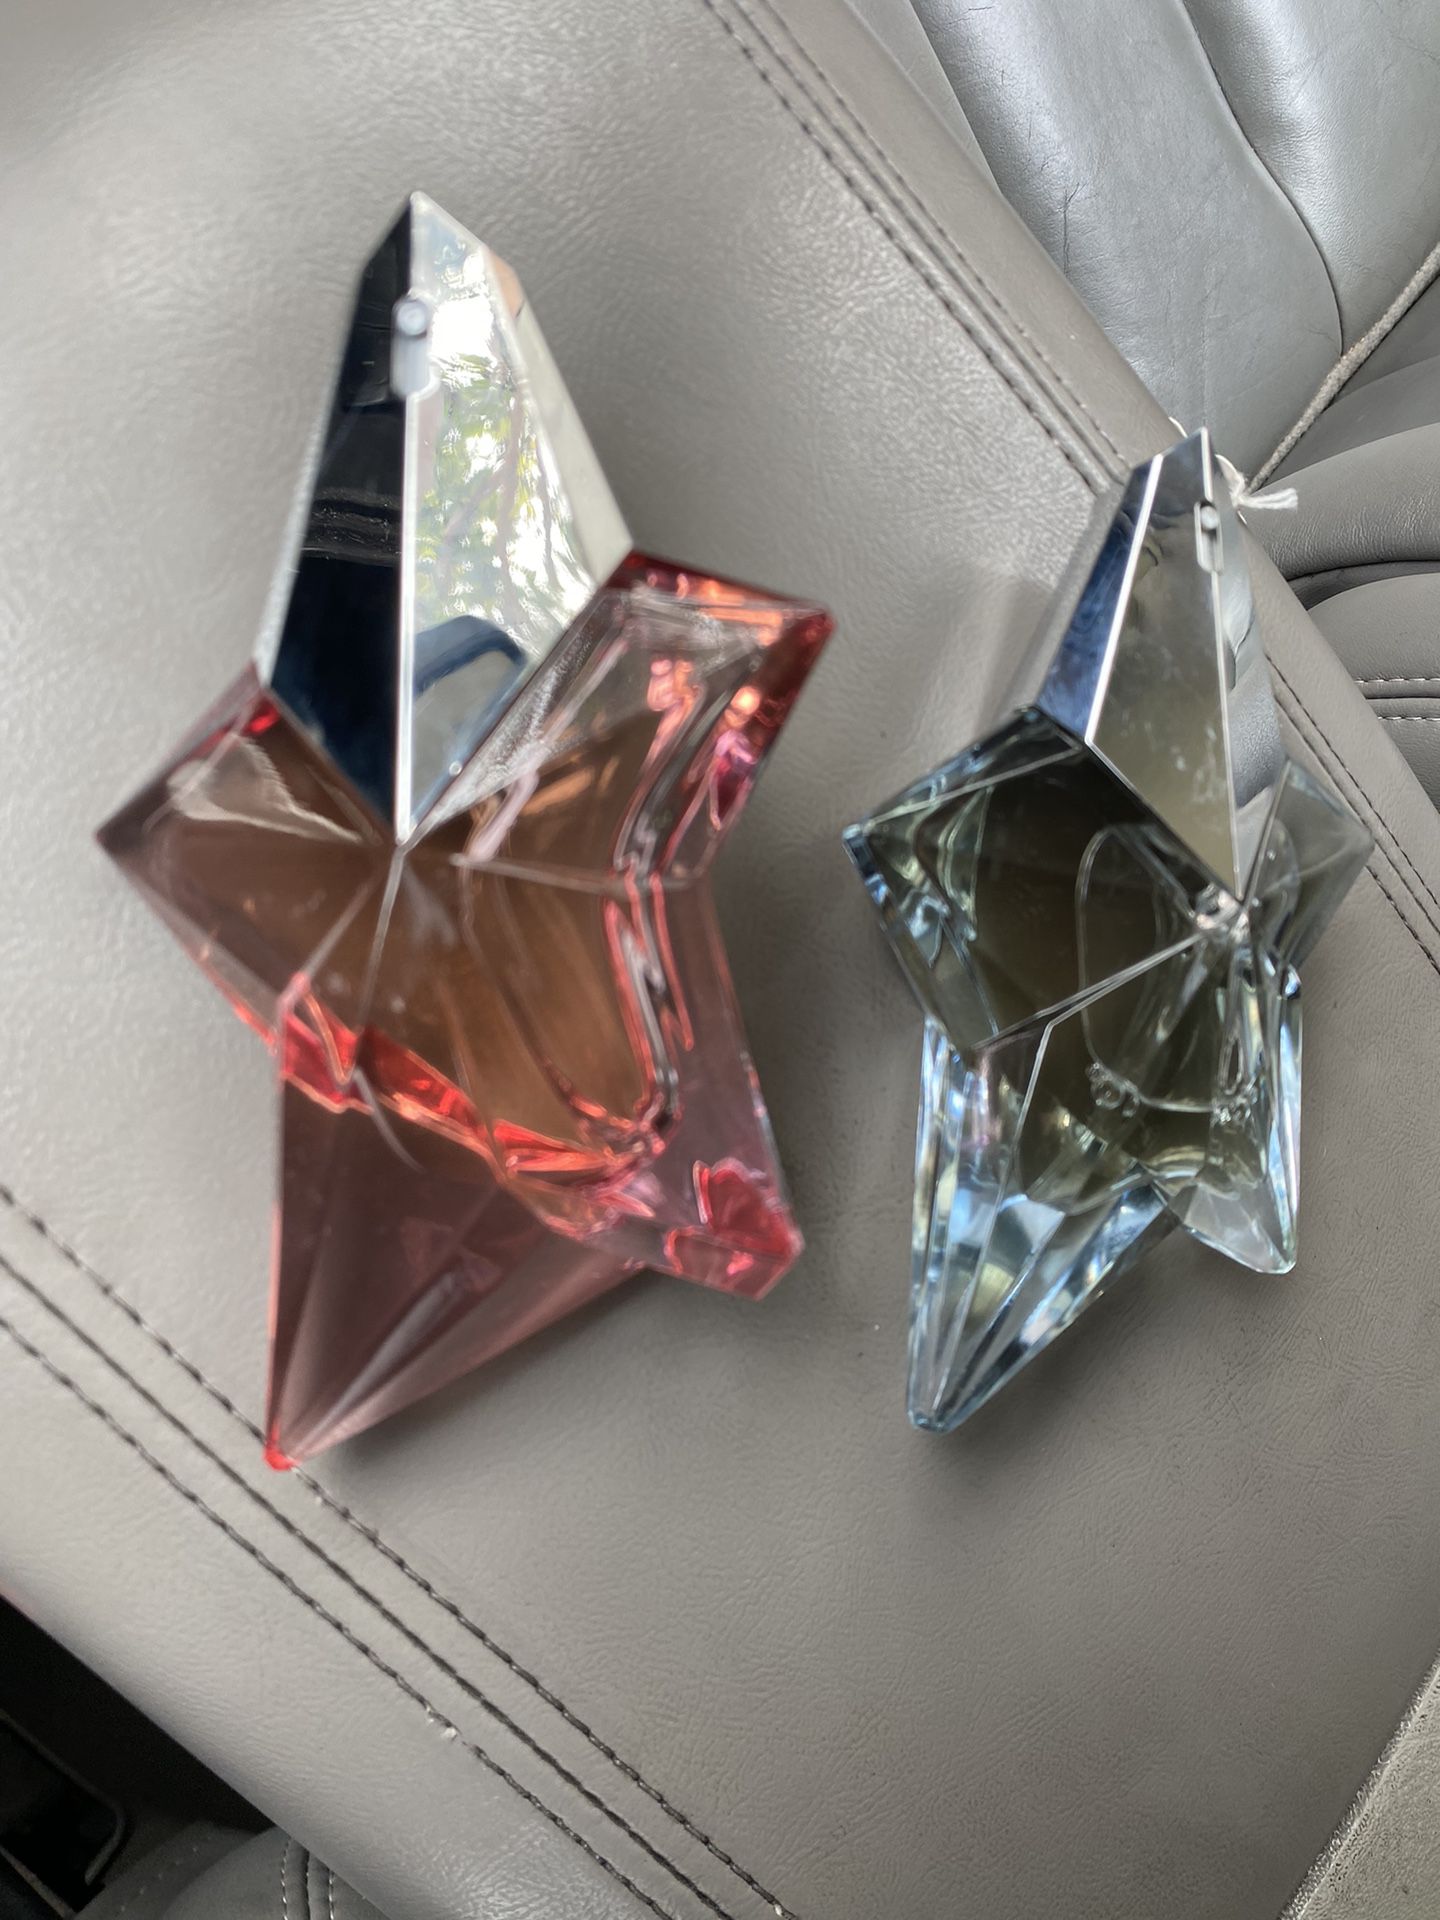 Mugler Perfume For Women Full No Box Selling Them Both Together For $85 